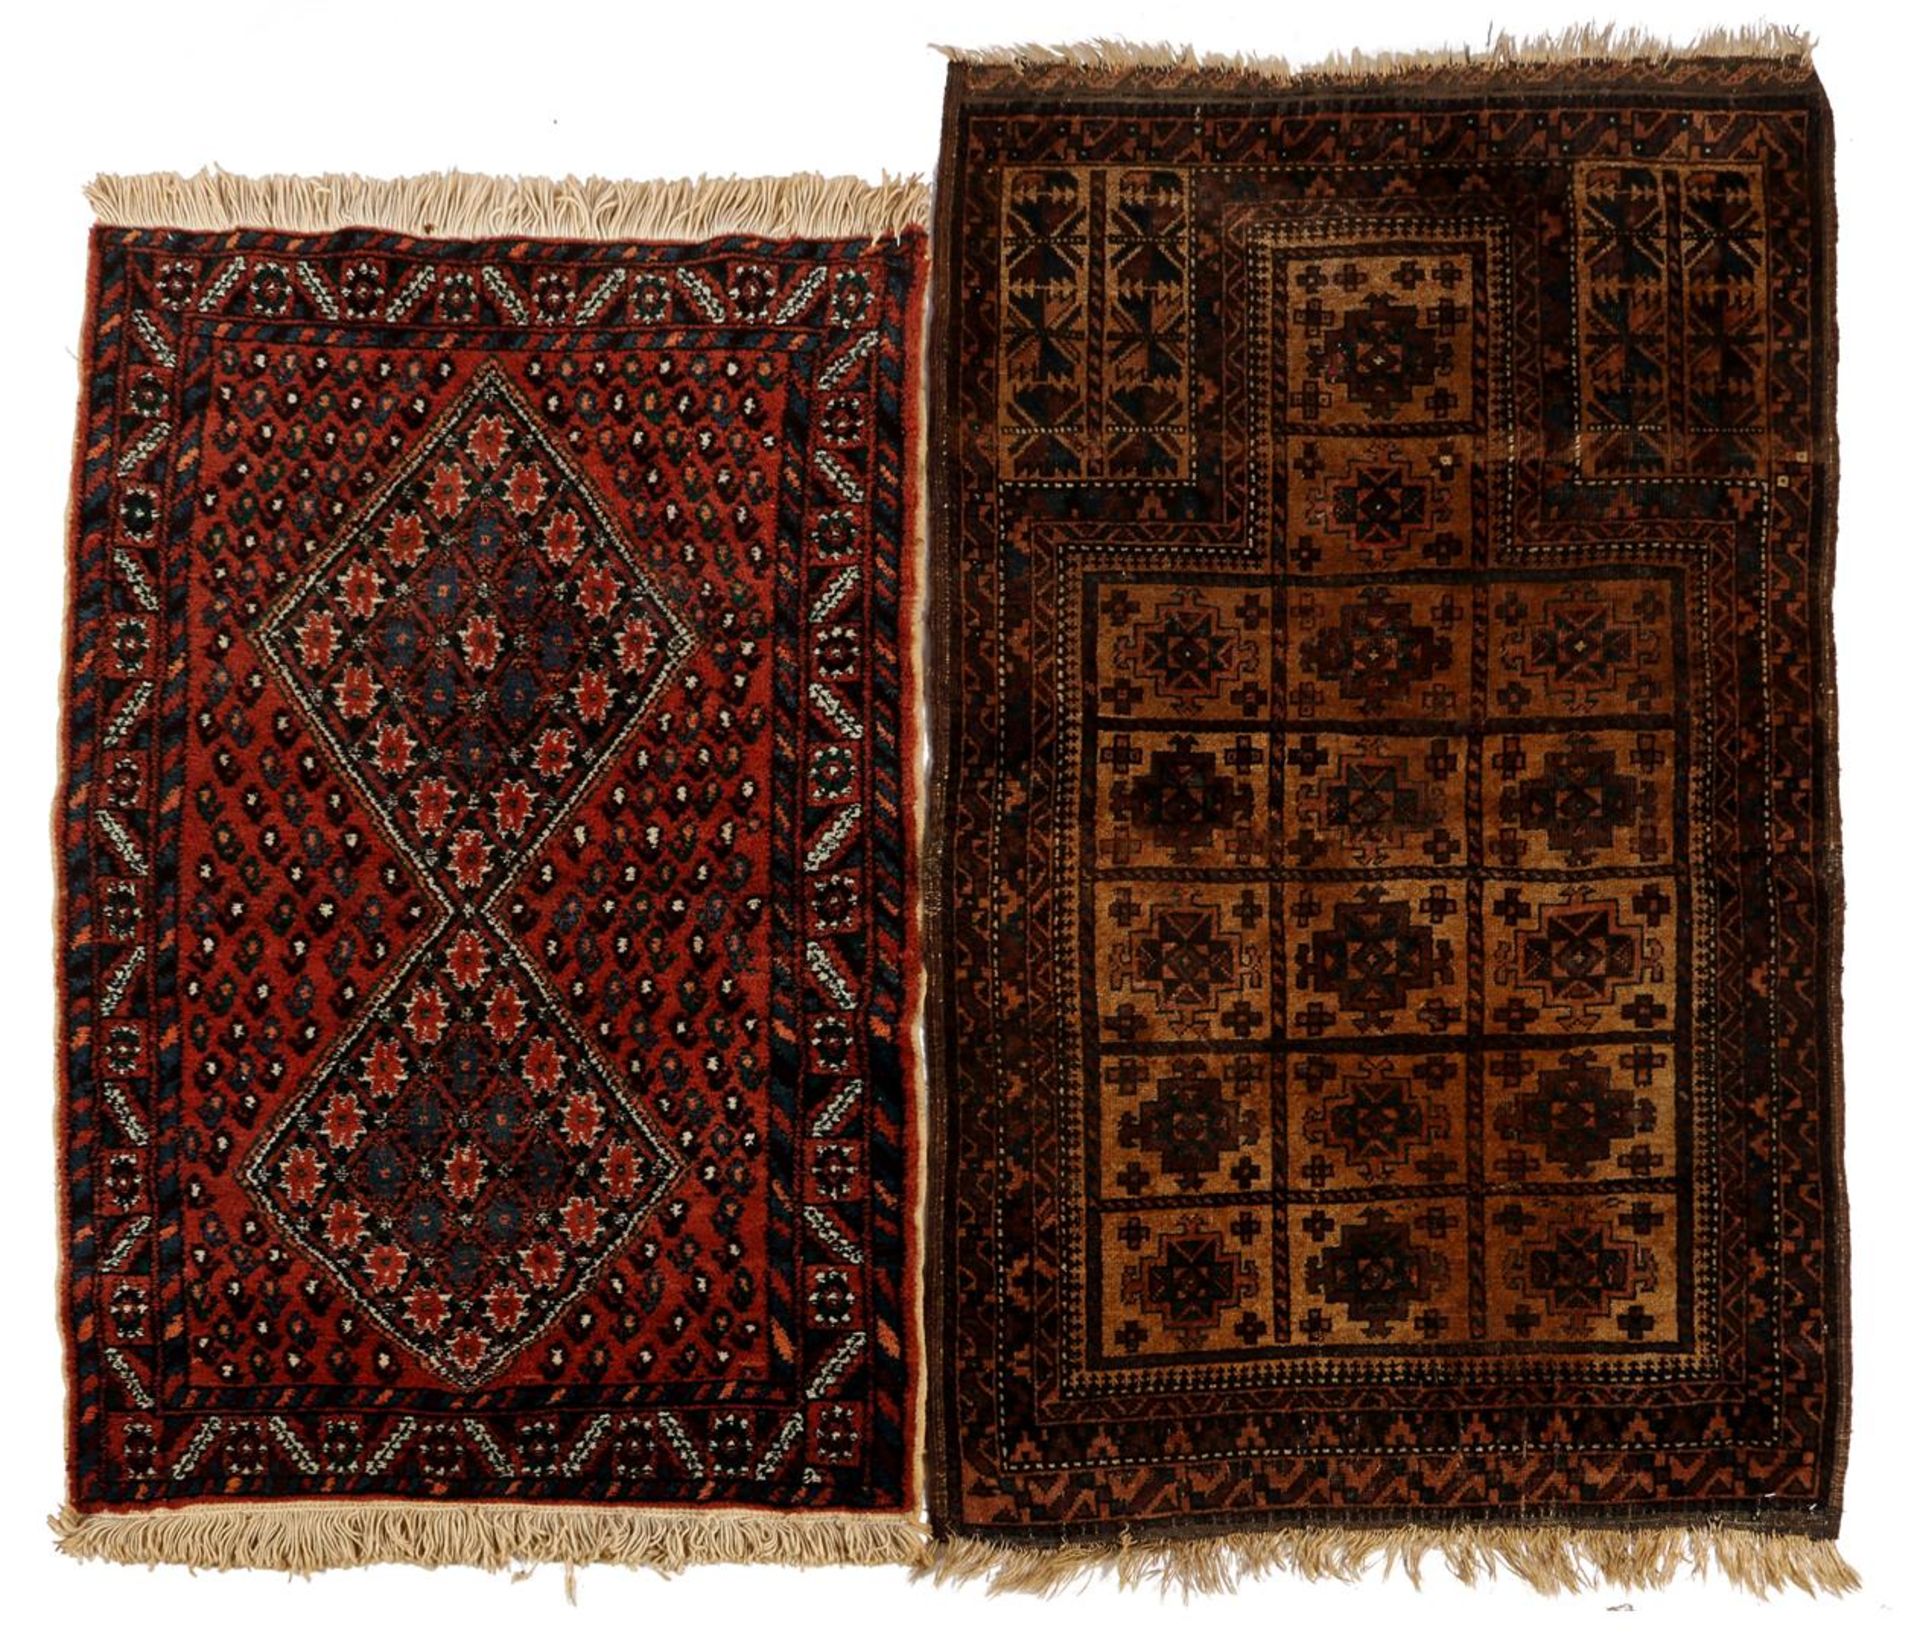 2 wool carpets with oriental decor